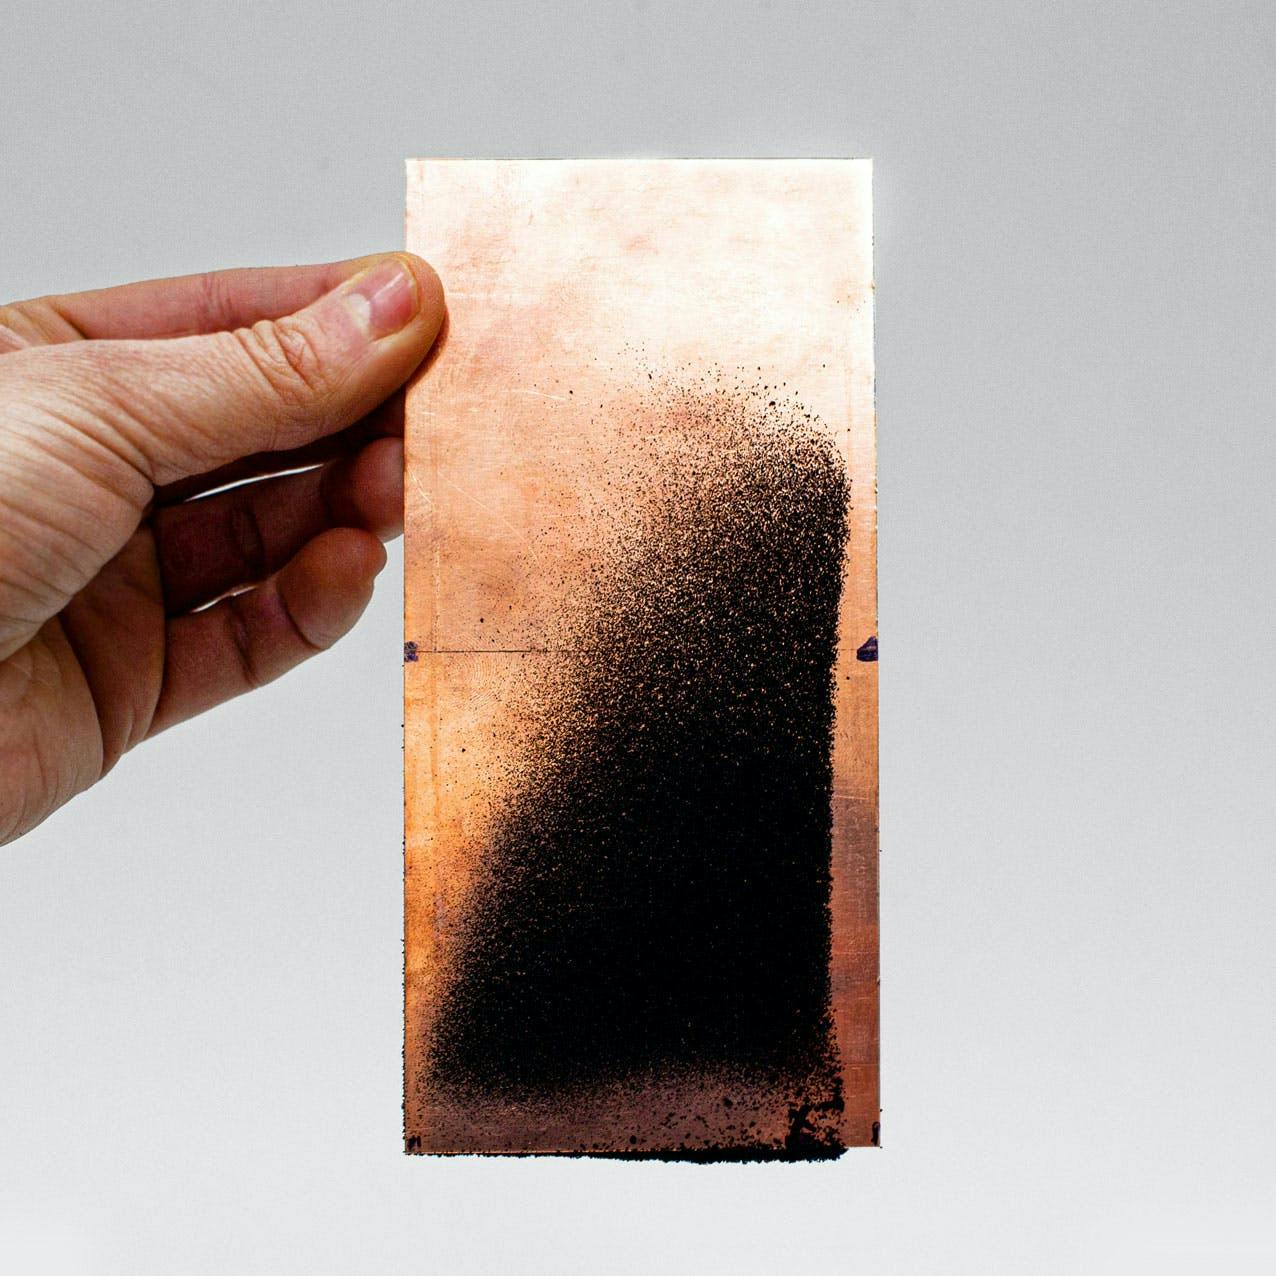 Microplastic Particles on Copper Plate. Source: The Tyre Collective